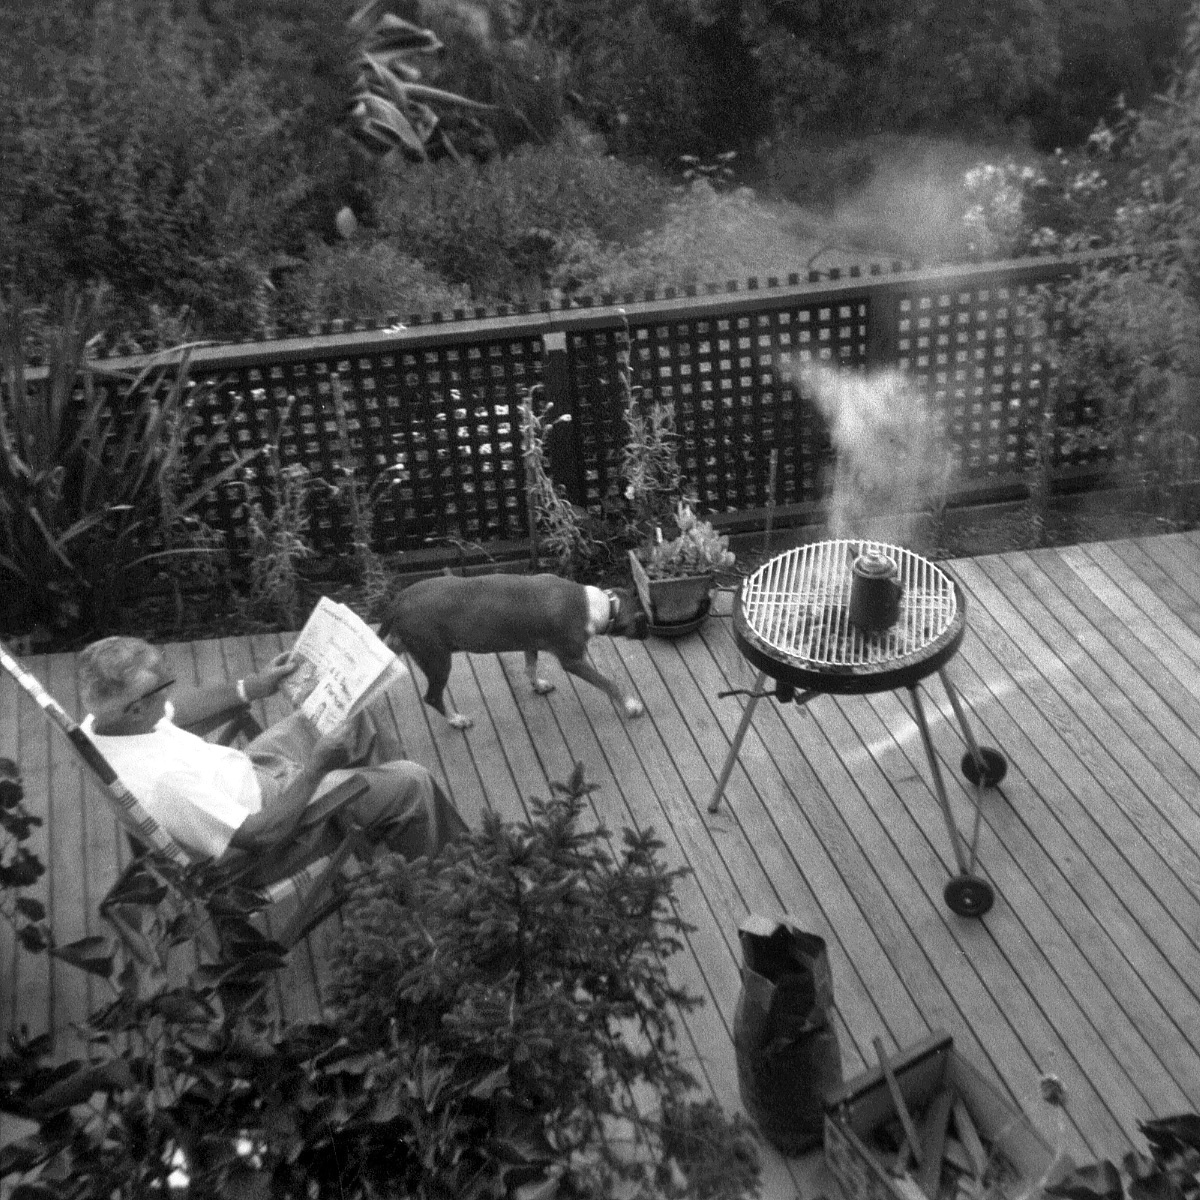 A garden, a deck, a barbecue, the family dog and the papers. My father, after a day at work, relaxes in his domain in 1962. You don't get more echt than this. He created the deck and the lattice fence as well as surrounding gardens, a very small portion of which is at the top. Our BBQ seems starkly low-tech these days. No starter fluid for Father; that's a box of kindling at the bottom. Snapped with my Kodak Brownie Starmite. View full size.